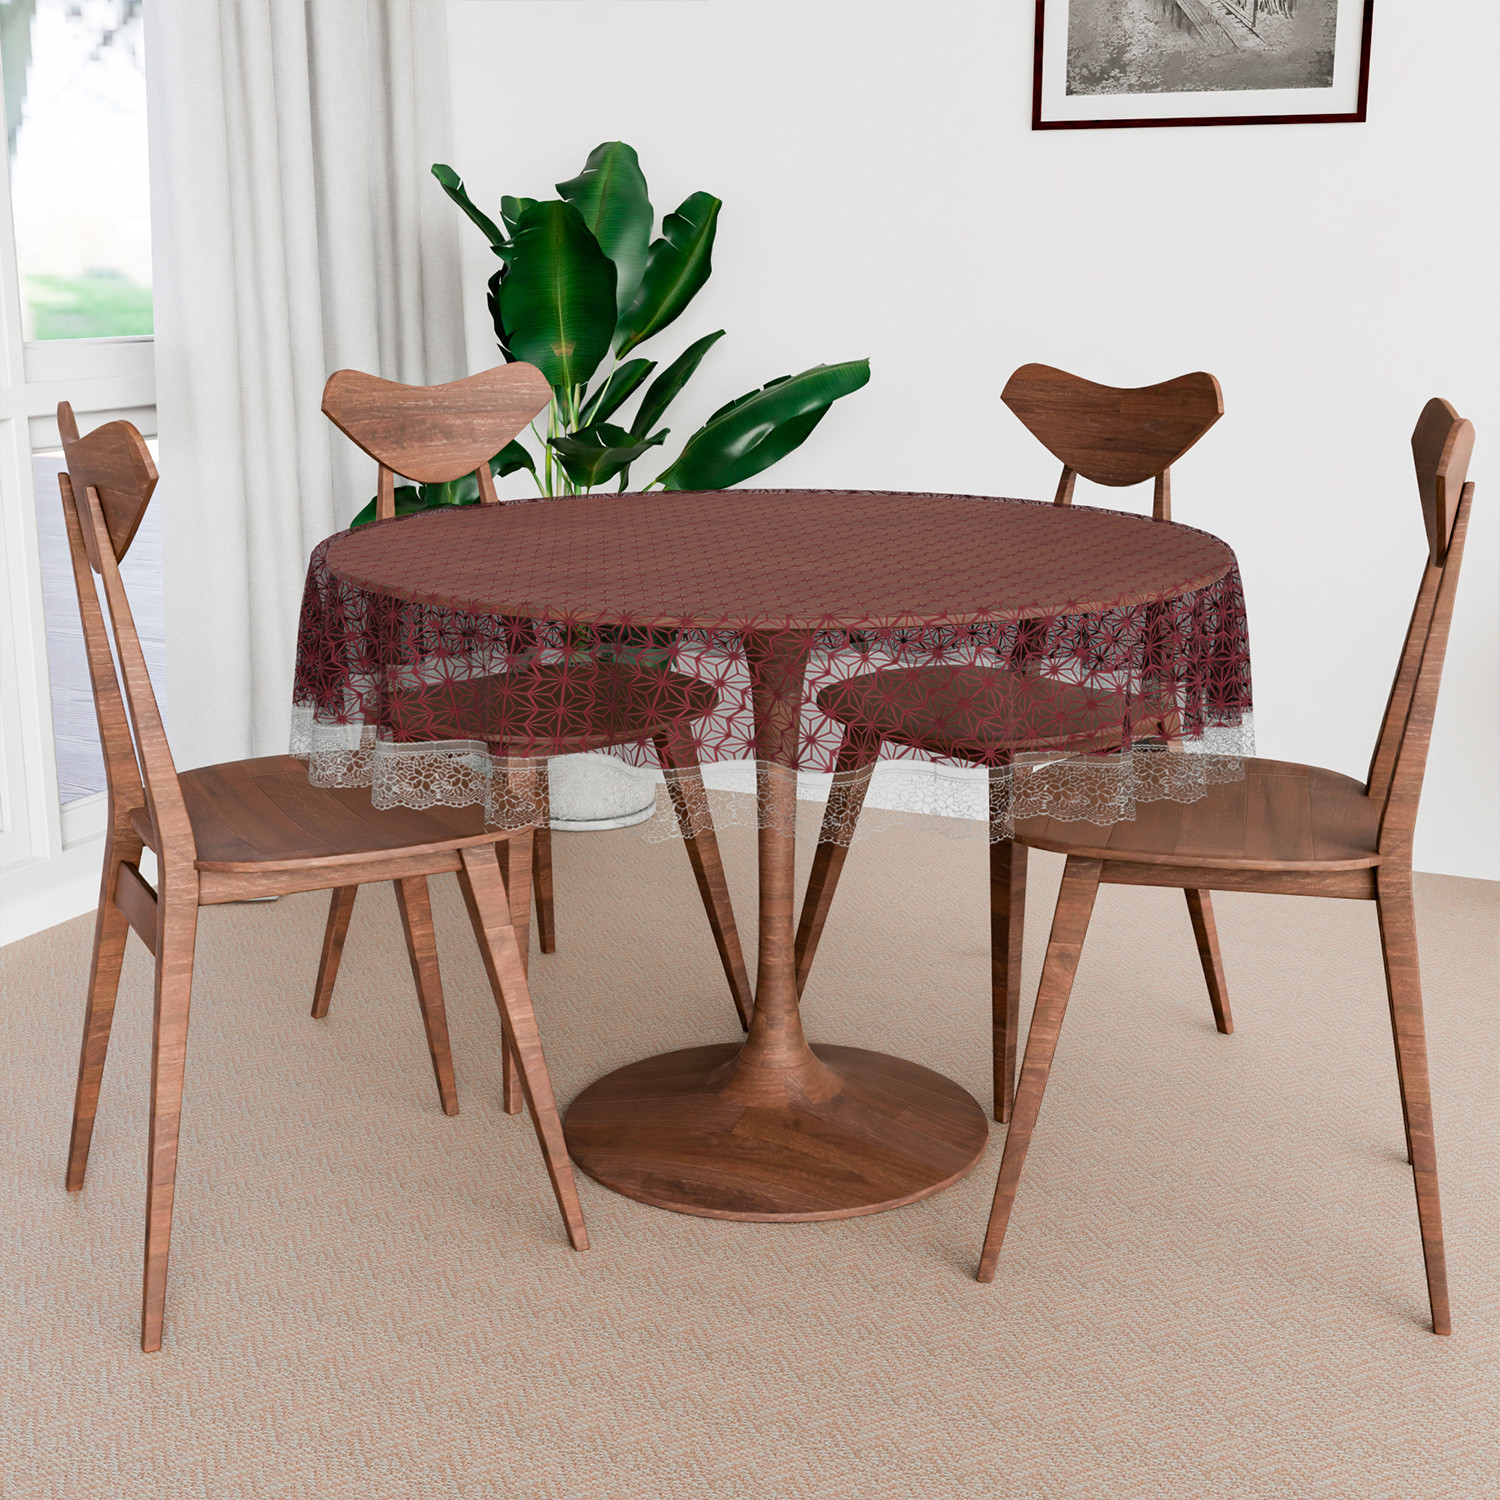 Kuber Industries Round Table Cover | PVC Table Cloth for Round Tables | 4 Seater Round Table Cloth | Self Star Kitchen Dining Tablecloth | Tabletop Cover | 60 Inch | Brown